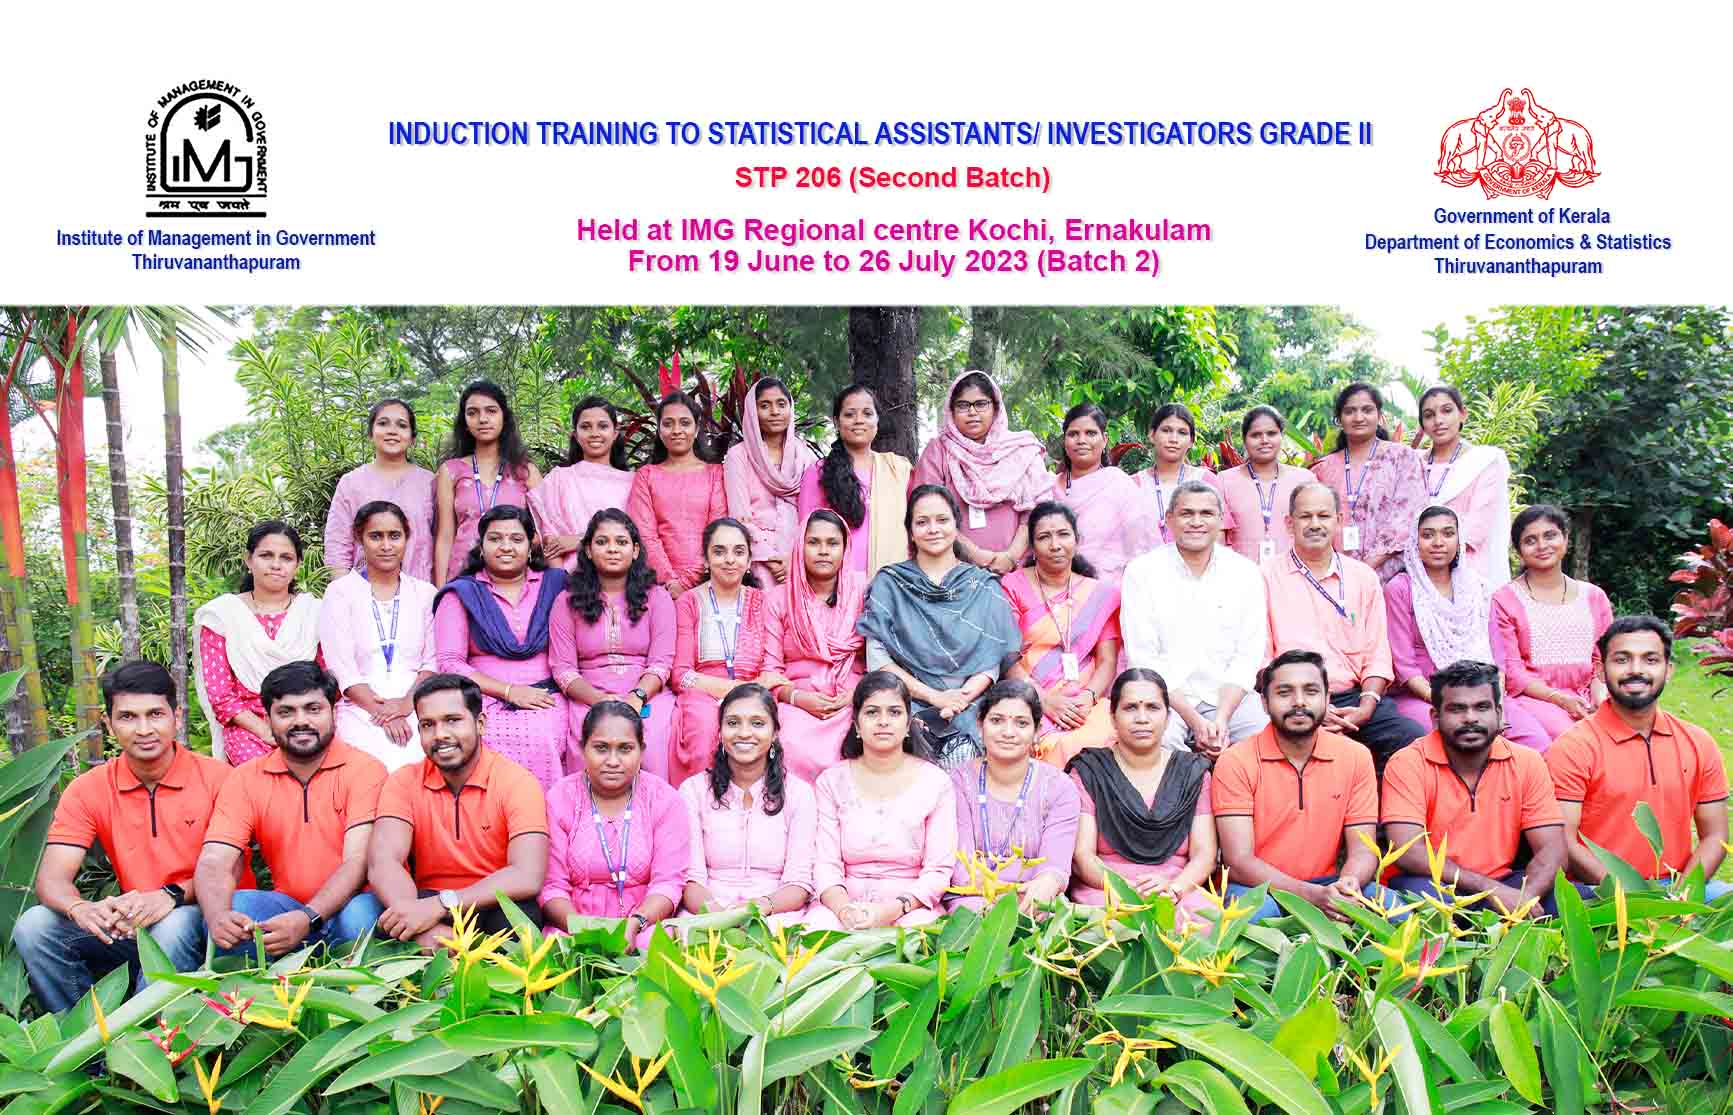 Induction Training to Statistical Assistants Grade II held at IMG Kochi 2nd Batch from 19-6 to 26-7 2023